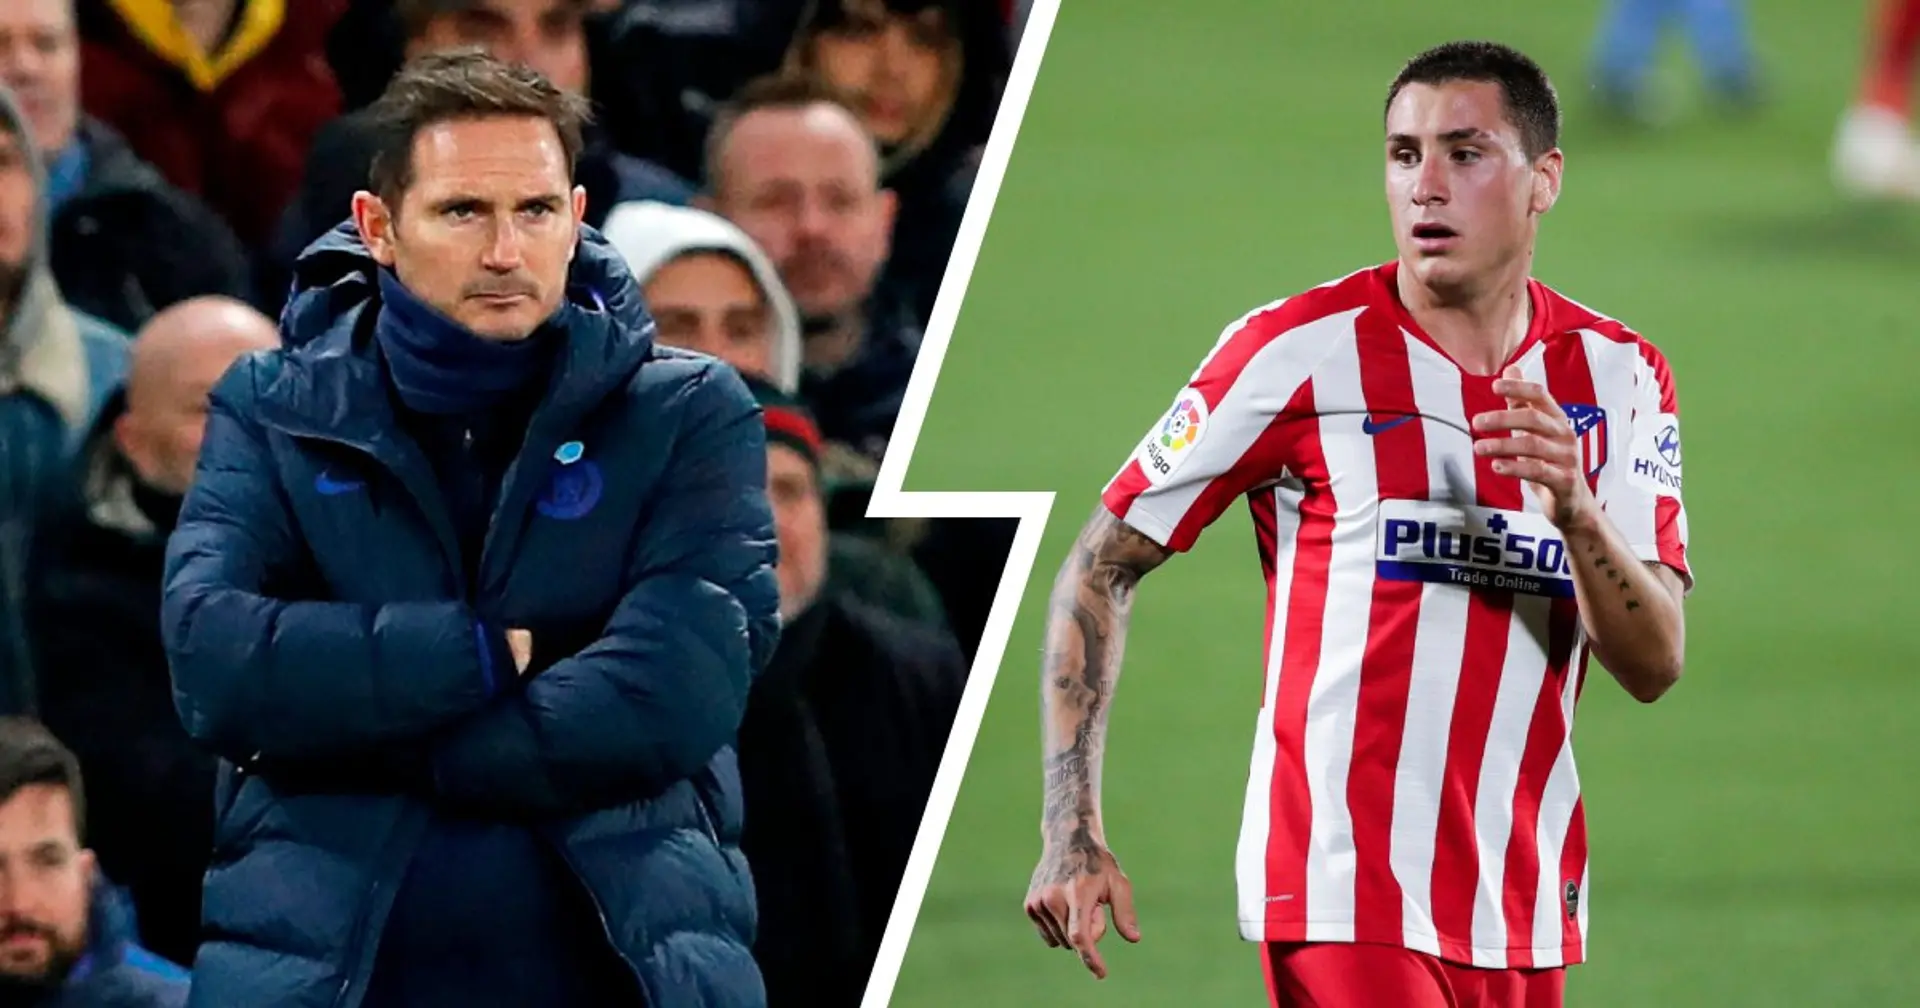 Jose Gimenez declares love for Chelsea but fans shouldn't be too excited: Analysing Atletico's centre-back